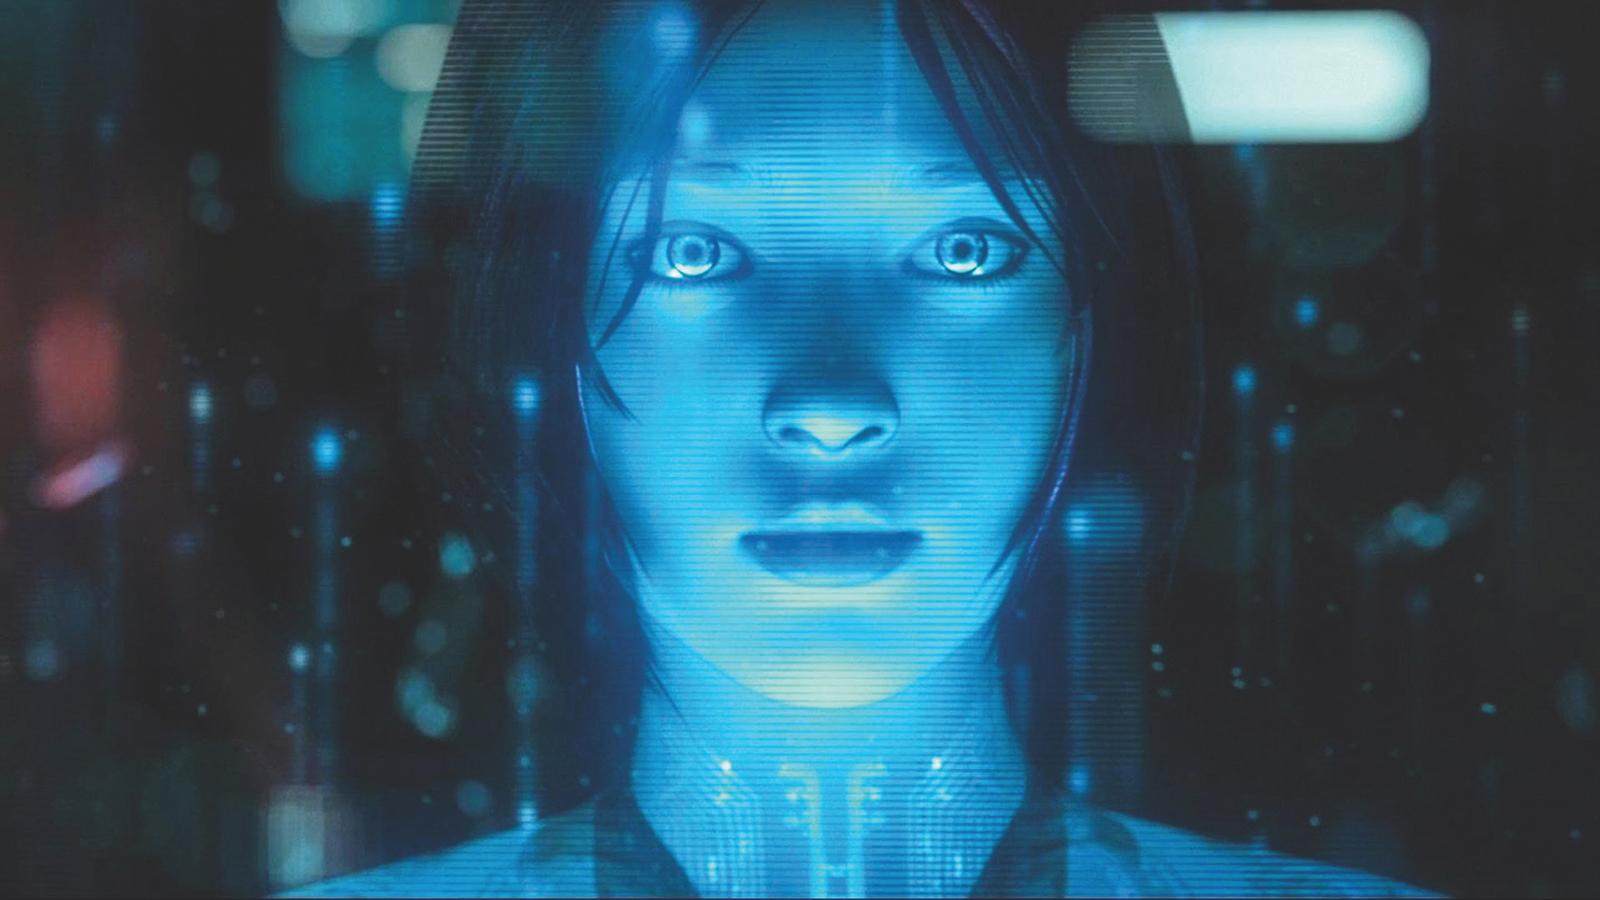 Here's the trailer for the Halo TV series, including a new Cortana